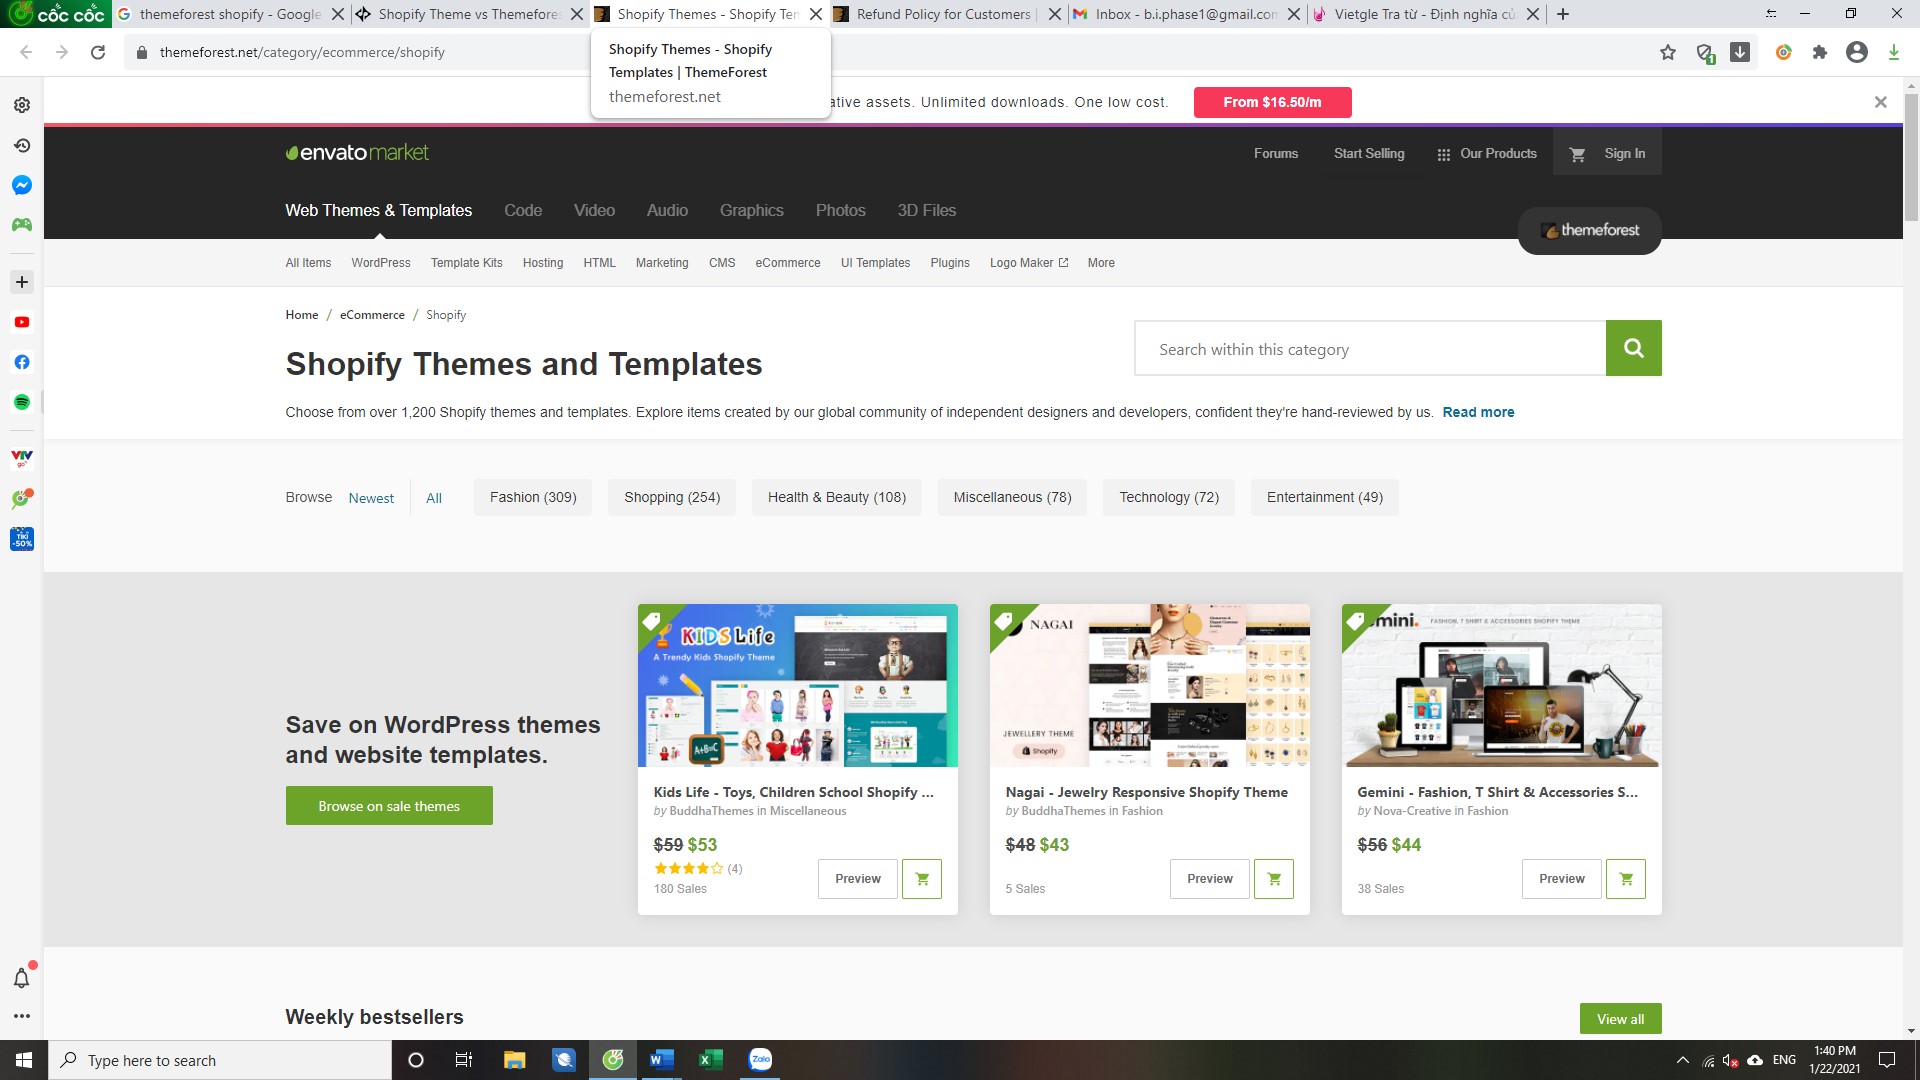 1. Shopify Themes offered in Themeforest.jpg